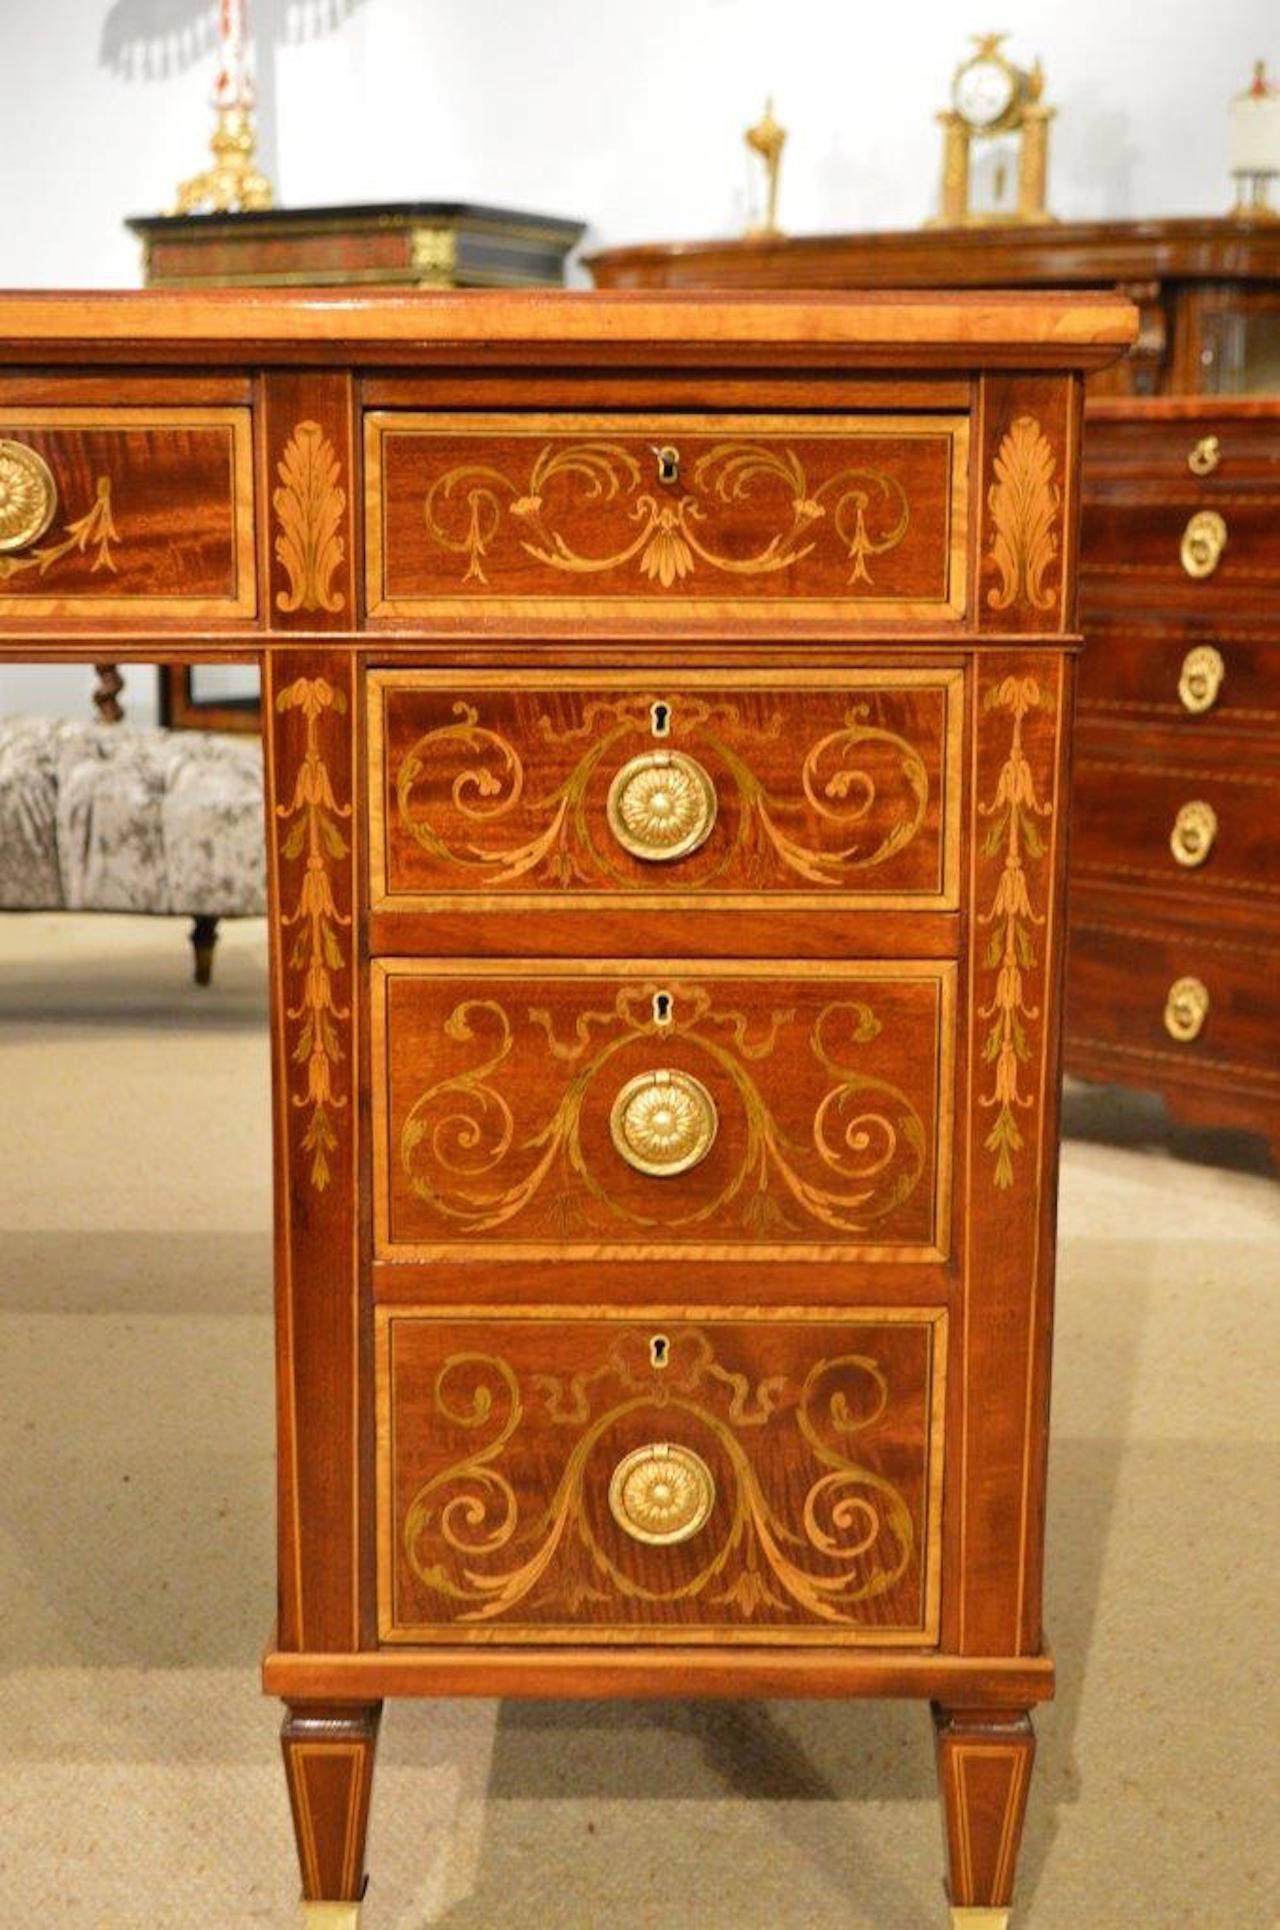 Early 20th Century Fine Quality Marquetry and Pen-Work Inlaid Sheraton Revival Antique Writing Desk